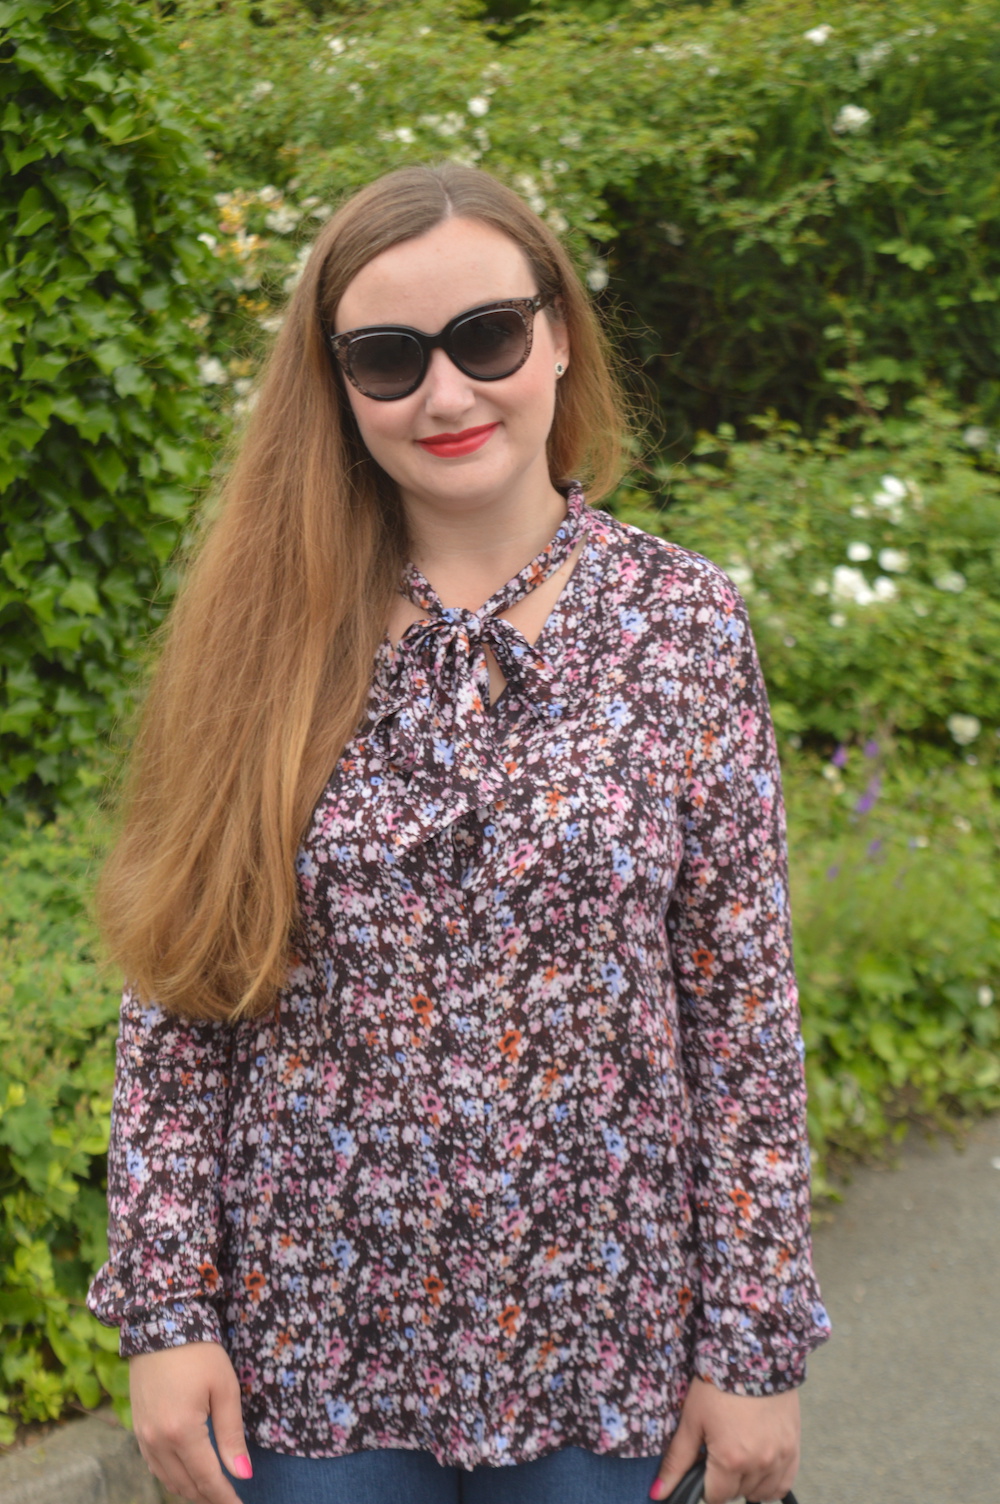 How To Style A Floral Pussy Bow Blouse – JacquardFlower